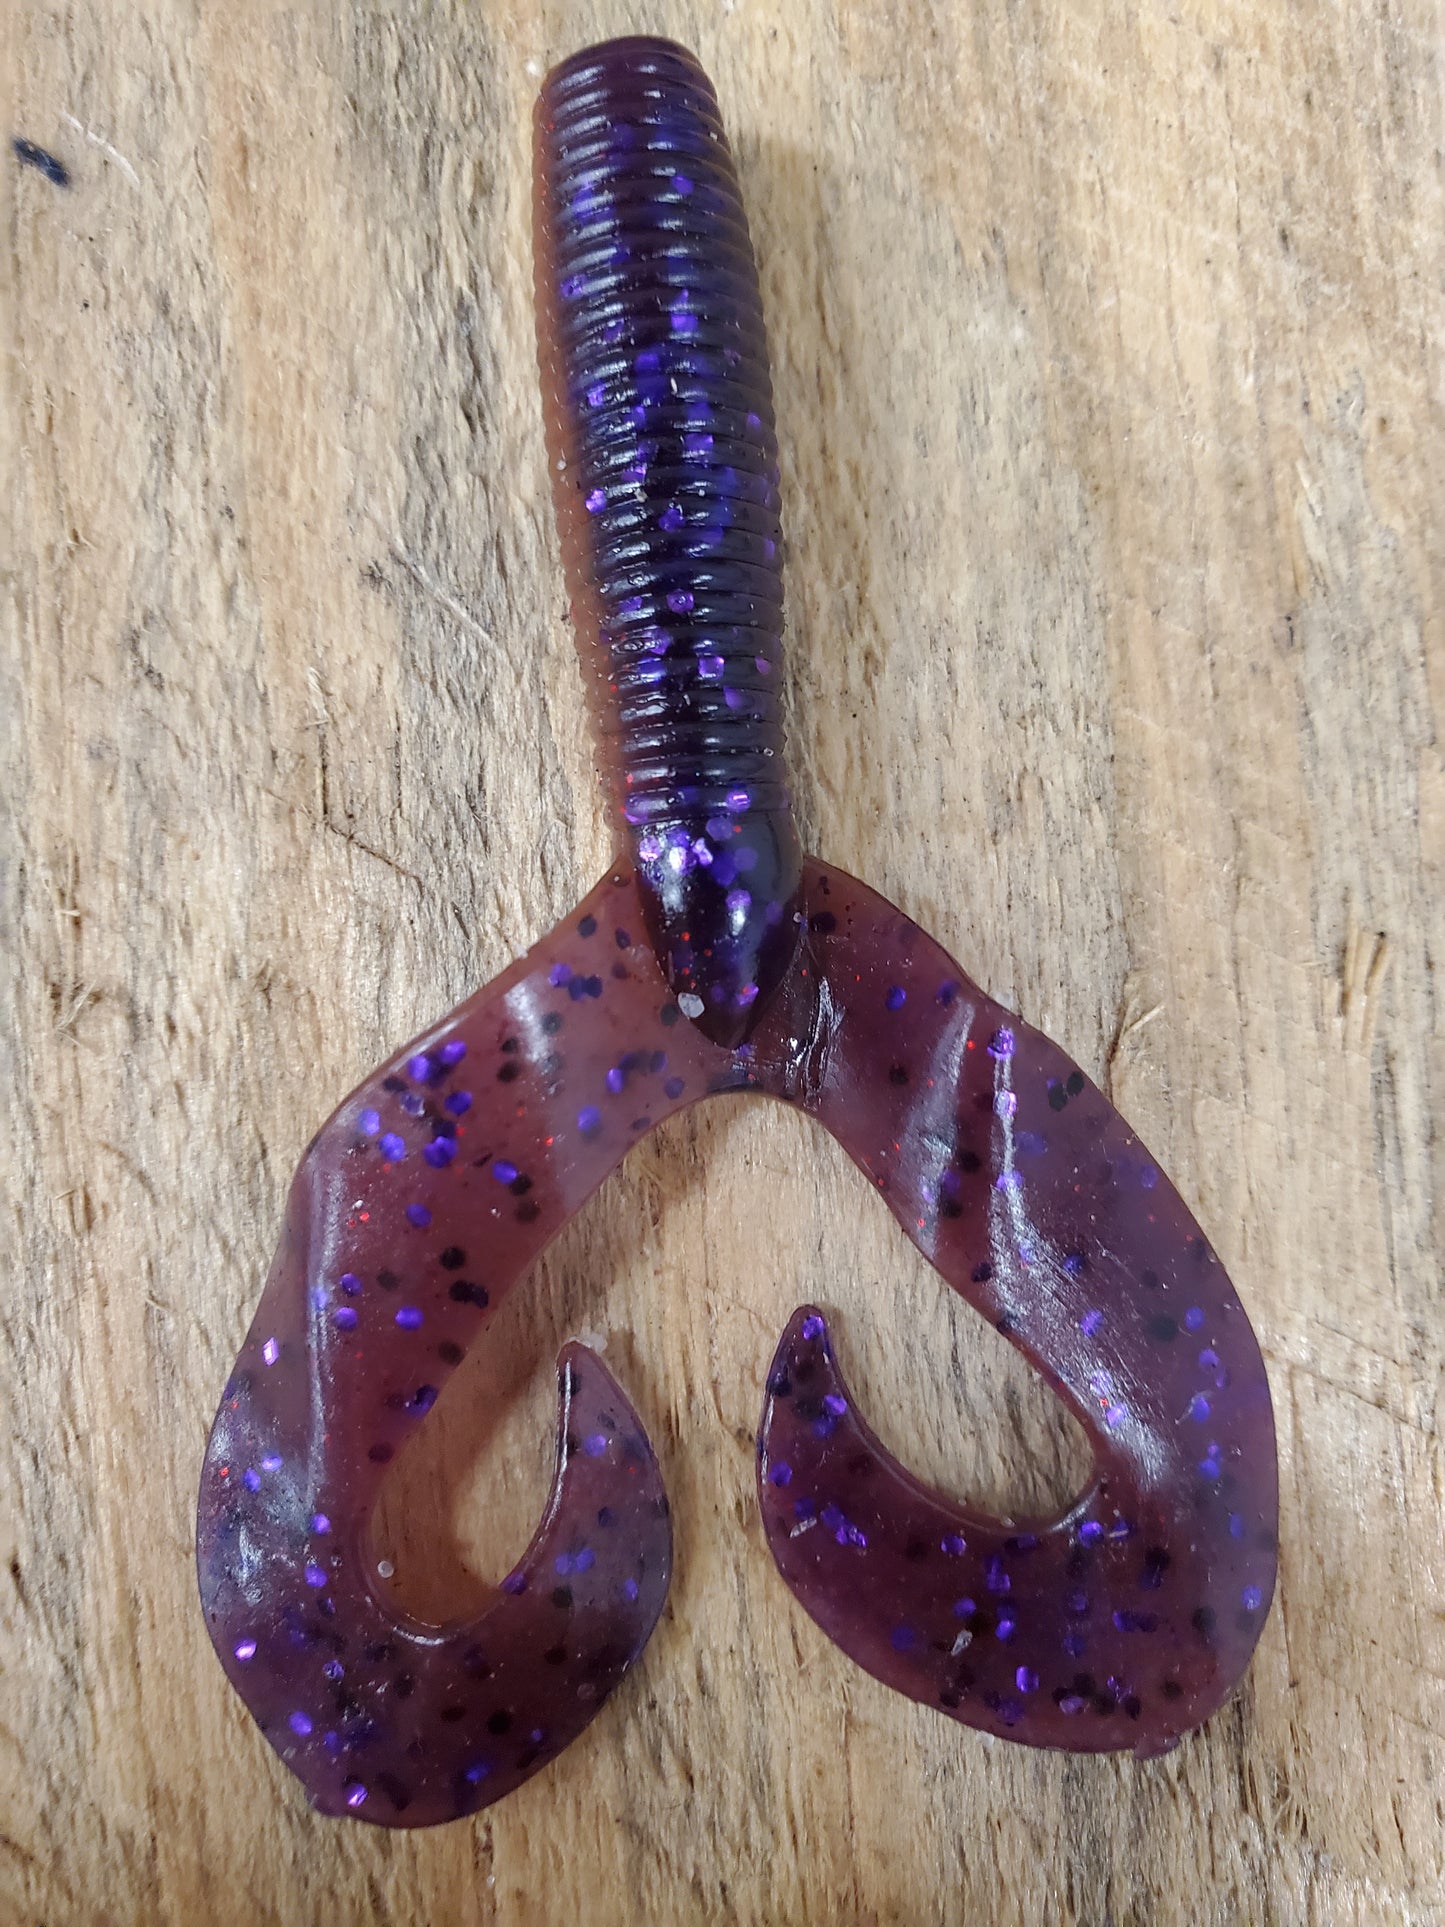 Double Tail 3" Finesse Grub